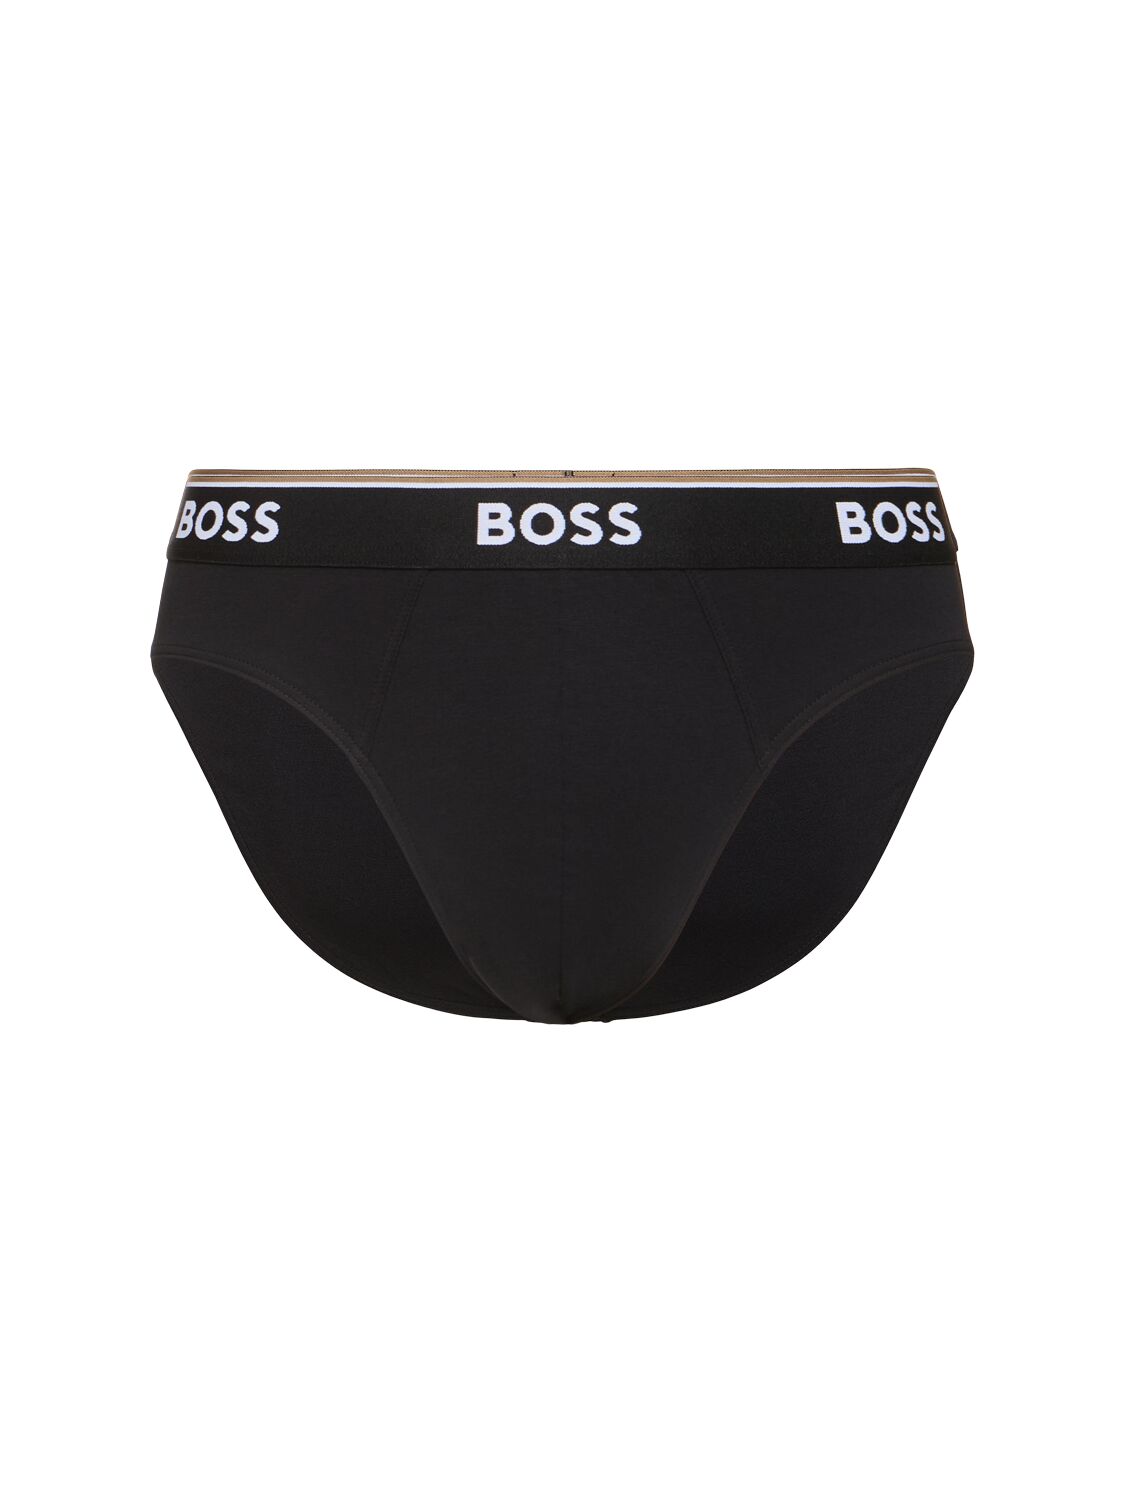 Hugo Boss Pack Of 3 Cotton Briefs In Black